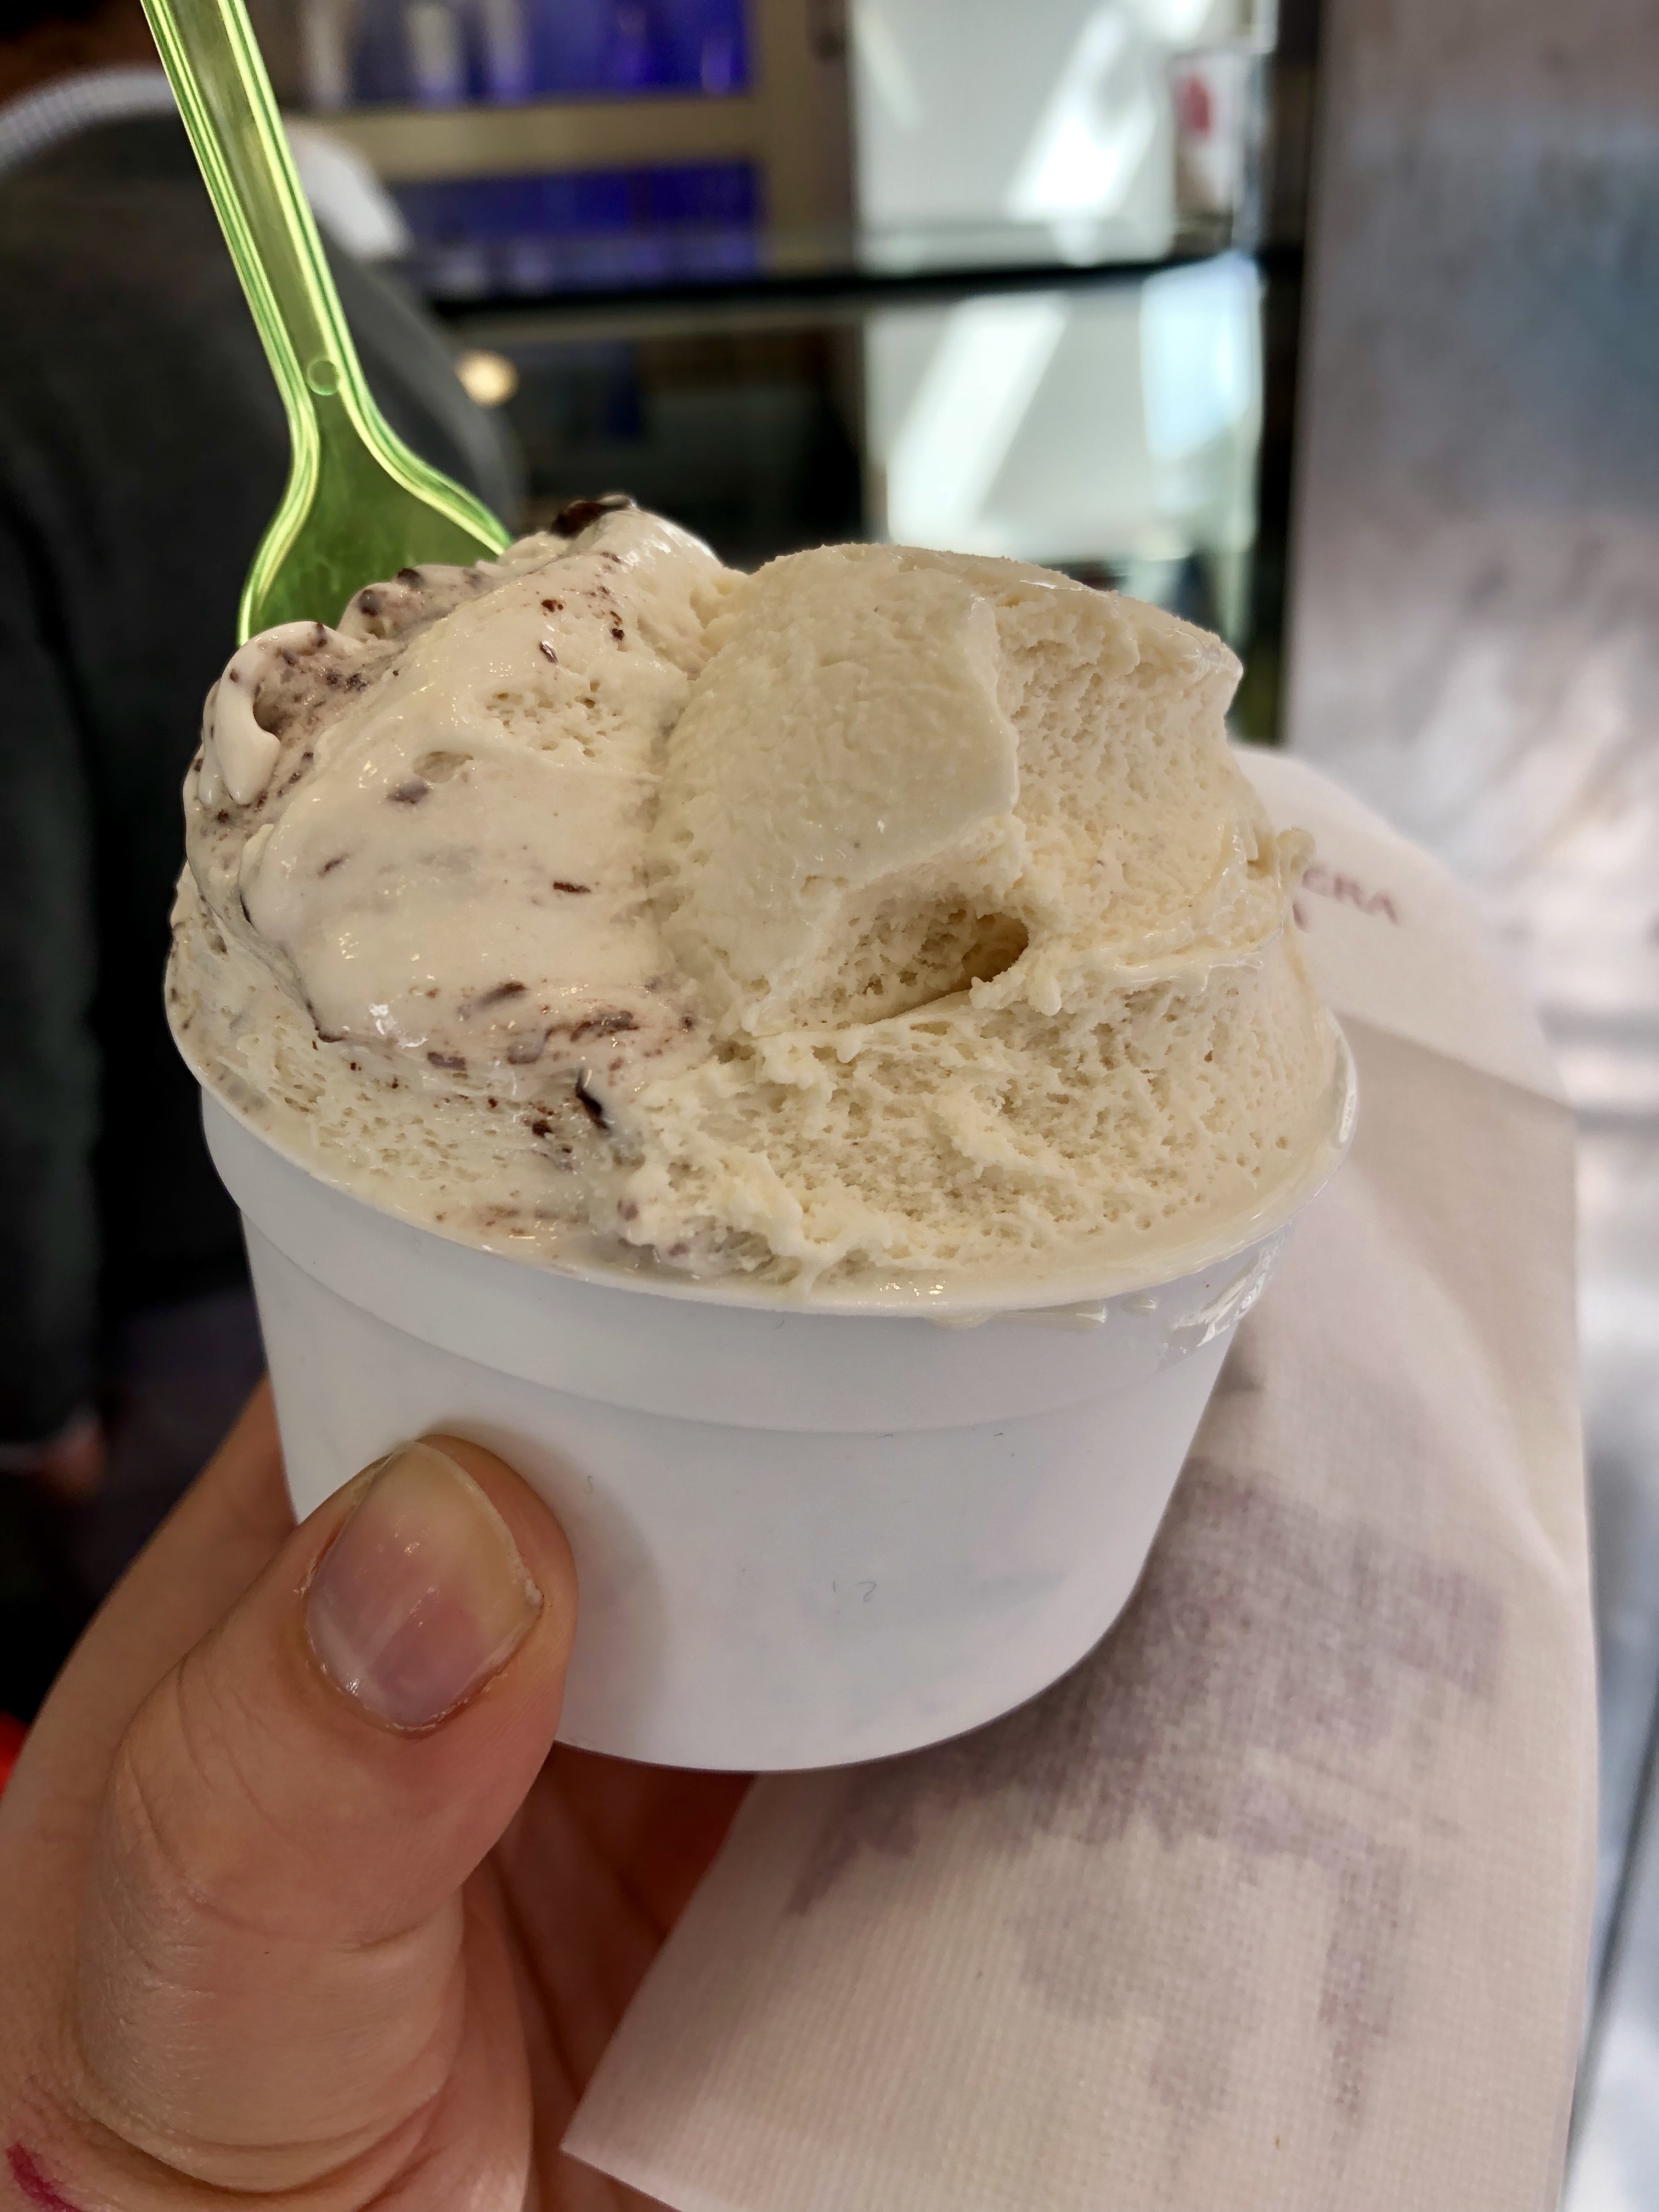 Rayas is a local favorite when it comes to ice cream in Seville